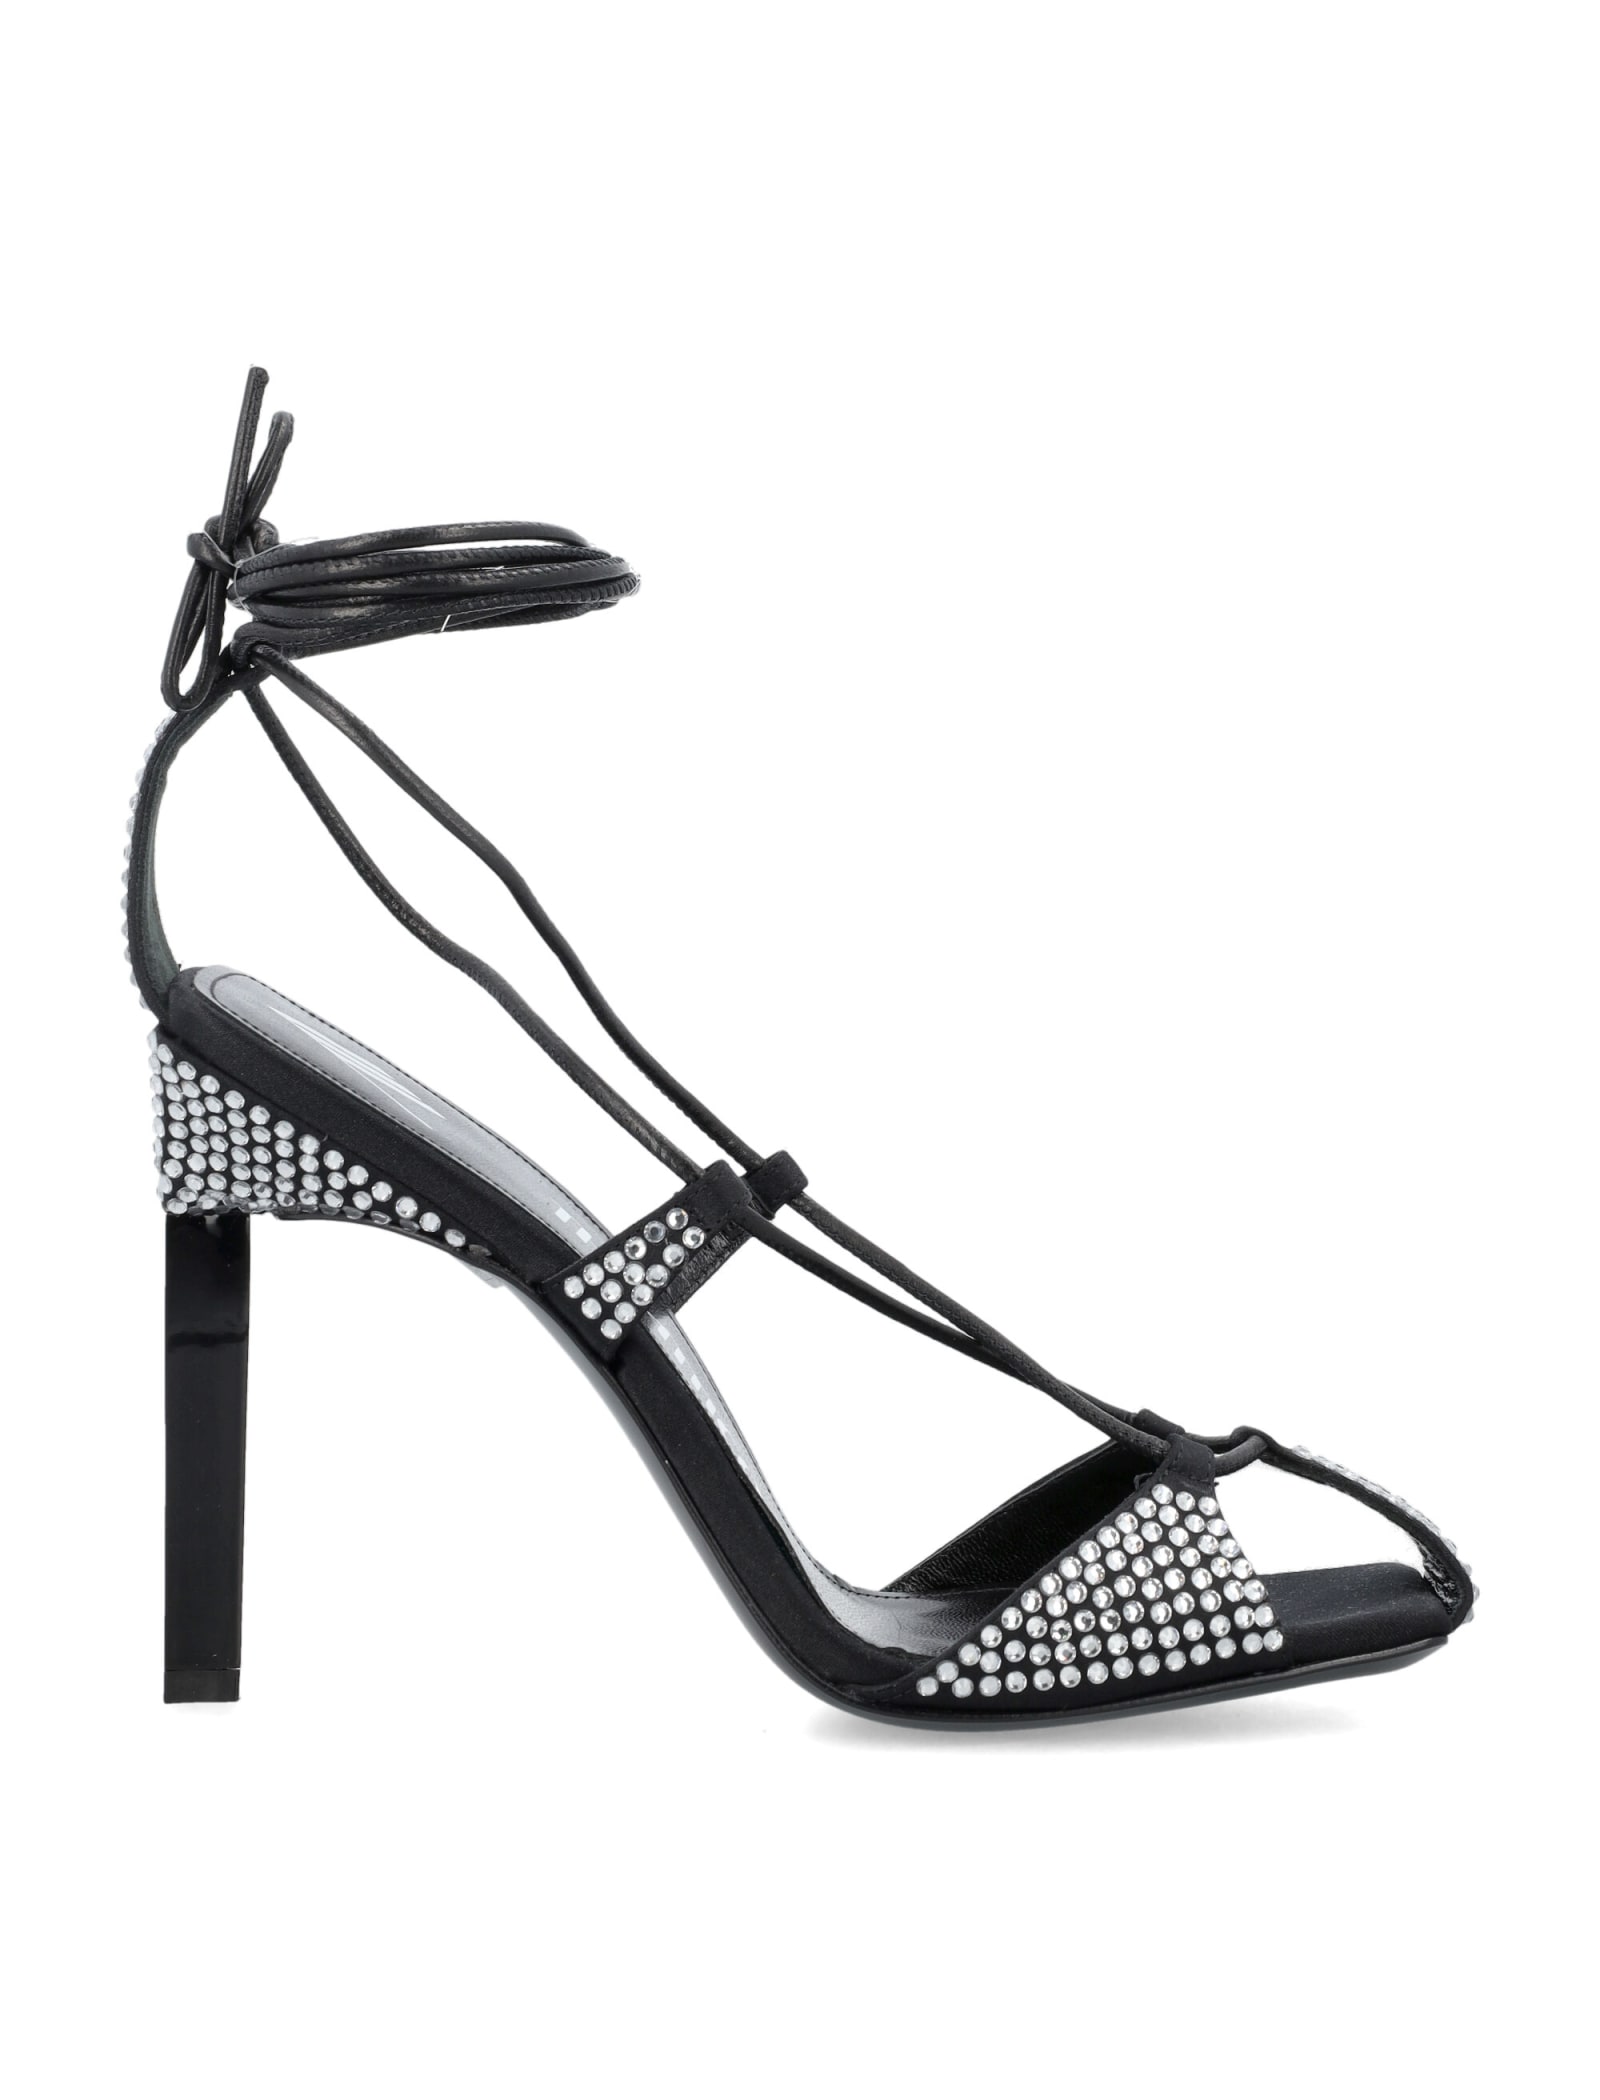 The Attico Adele Silver Strass Lace-up Sandal